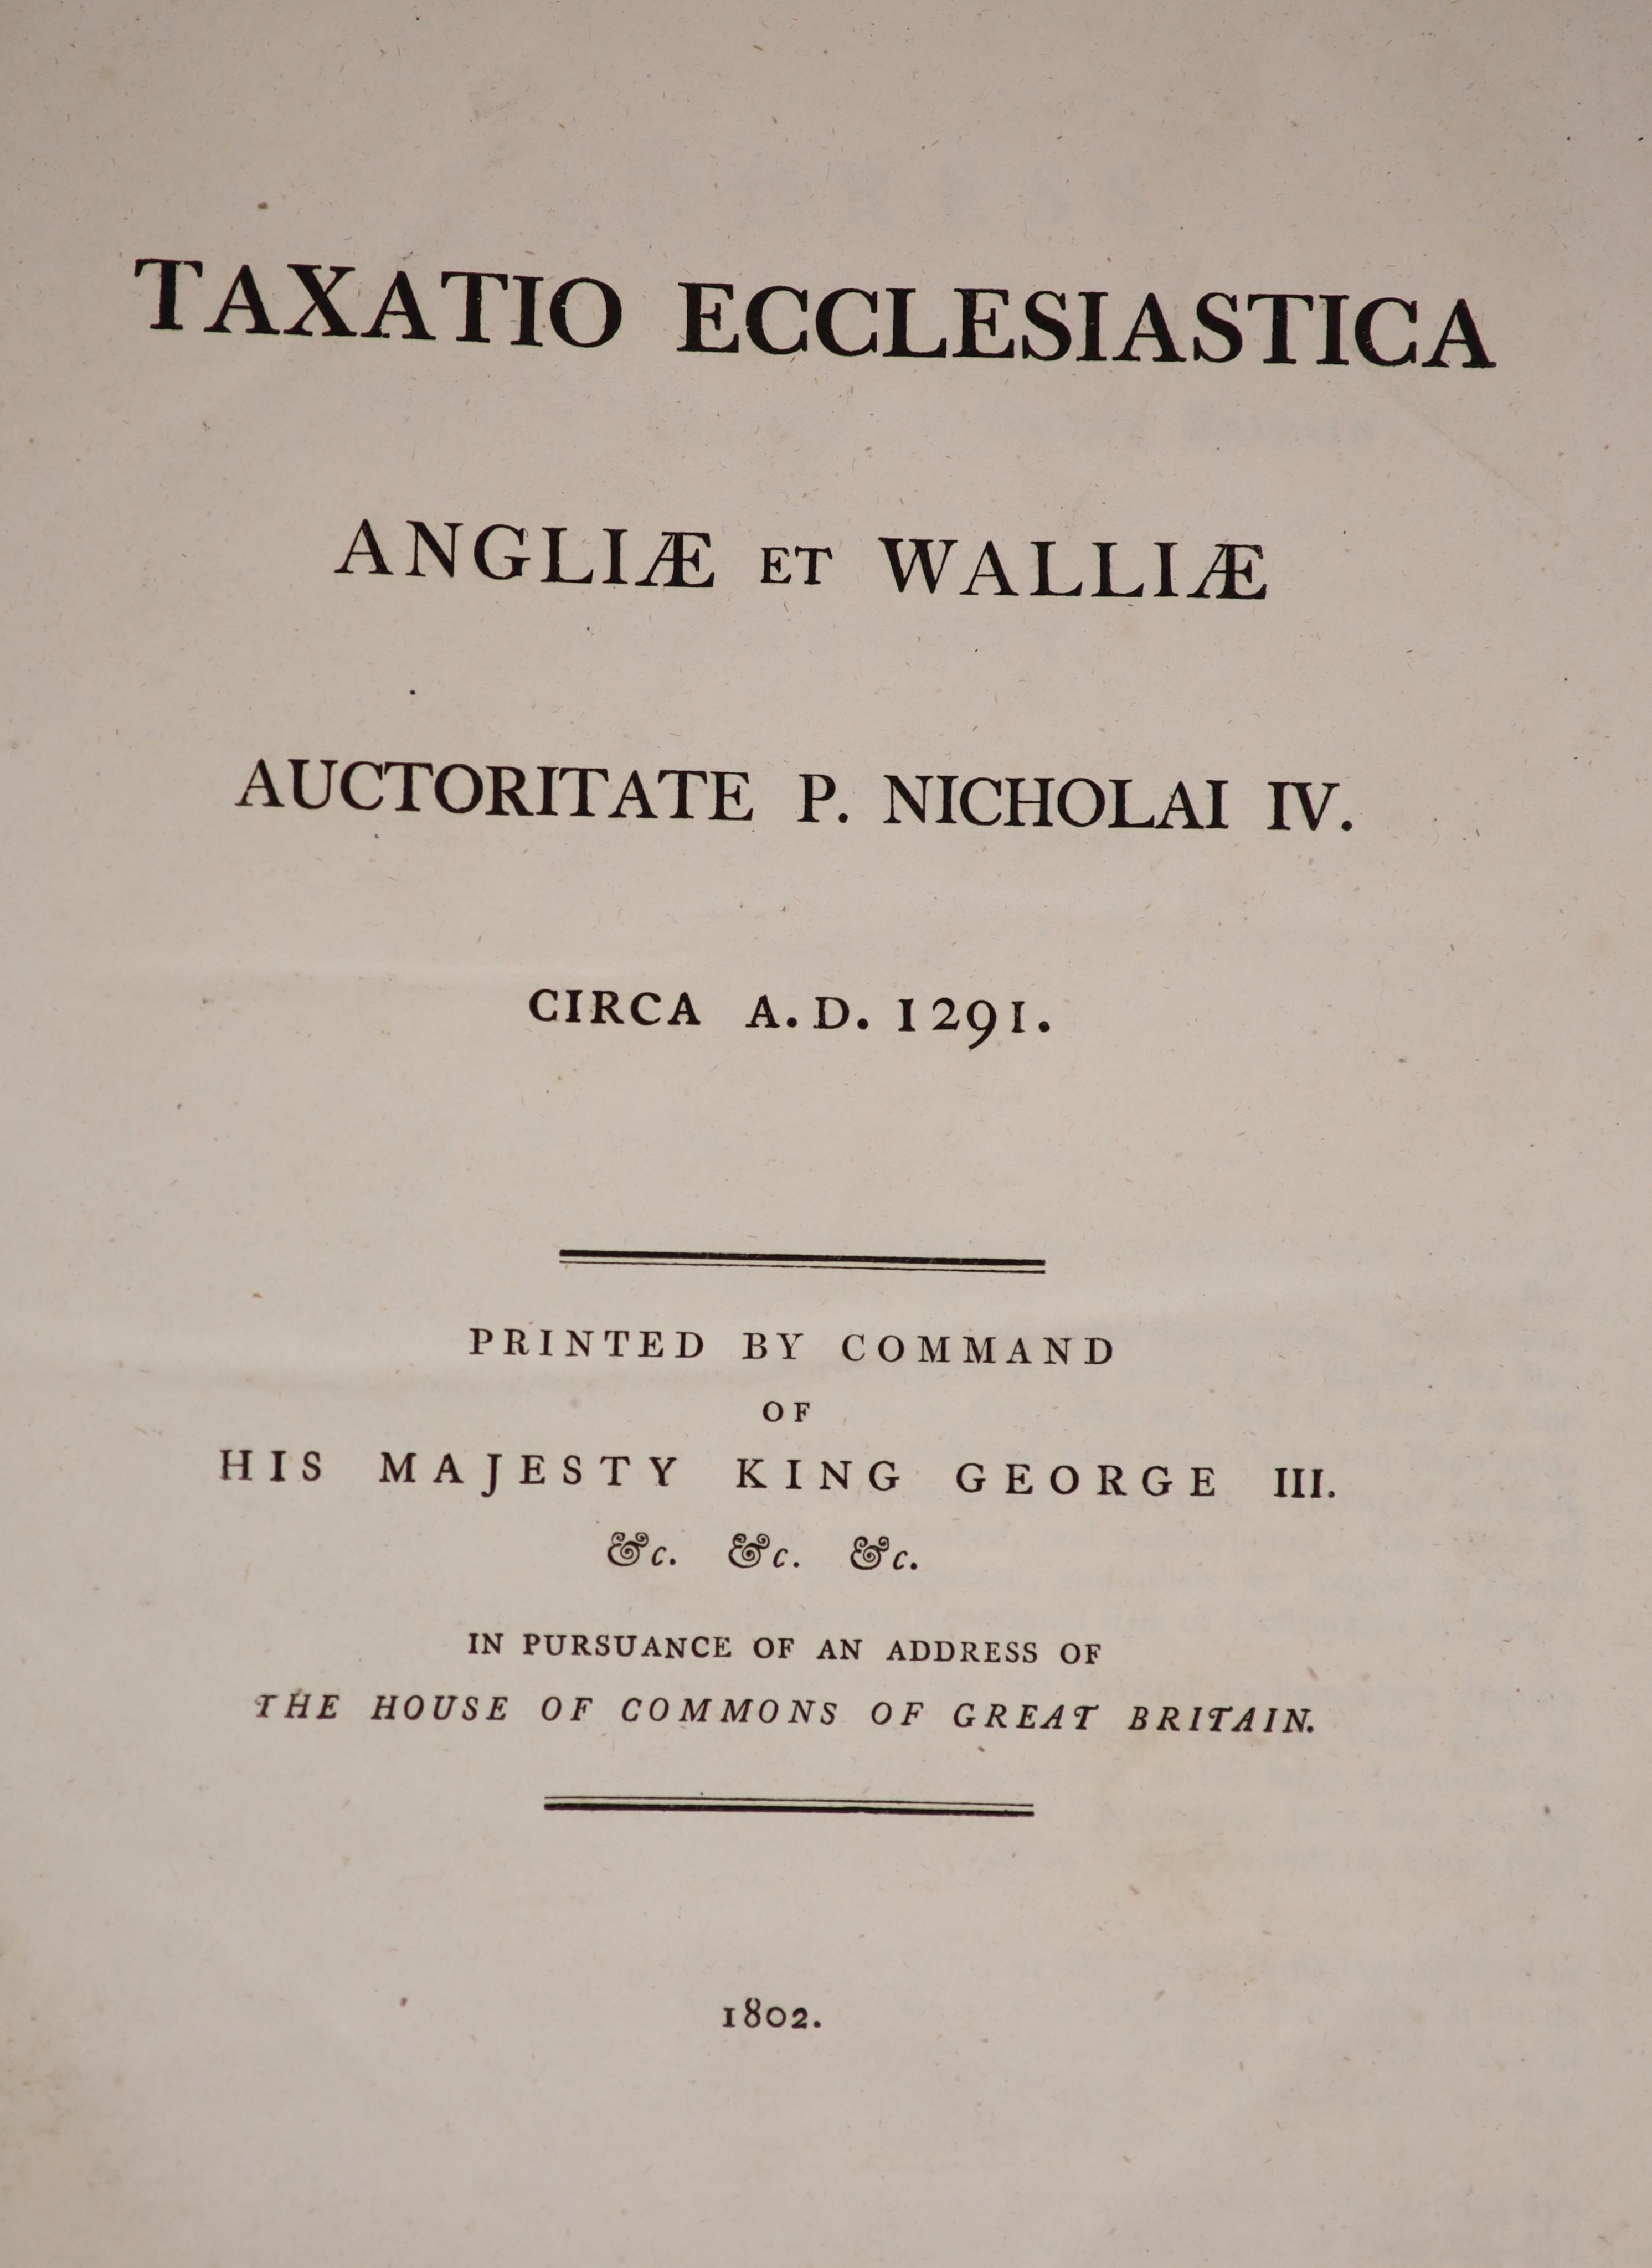 Astle, T. Ayscough, S. & Caley, J. [Ed’s.] Taxatio Ecclesiastica Angliæ et Walliæ Auctoritate P. Nicholai IV. Circa A. D. 1291. Folio, Printed by Command of His Majesty King George III &c. &c. &c. in Pursuance of an Addr